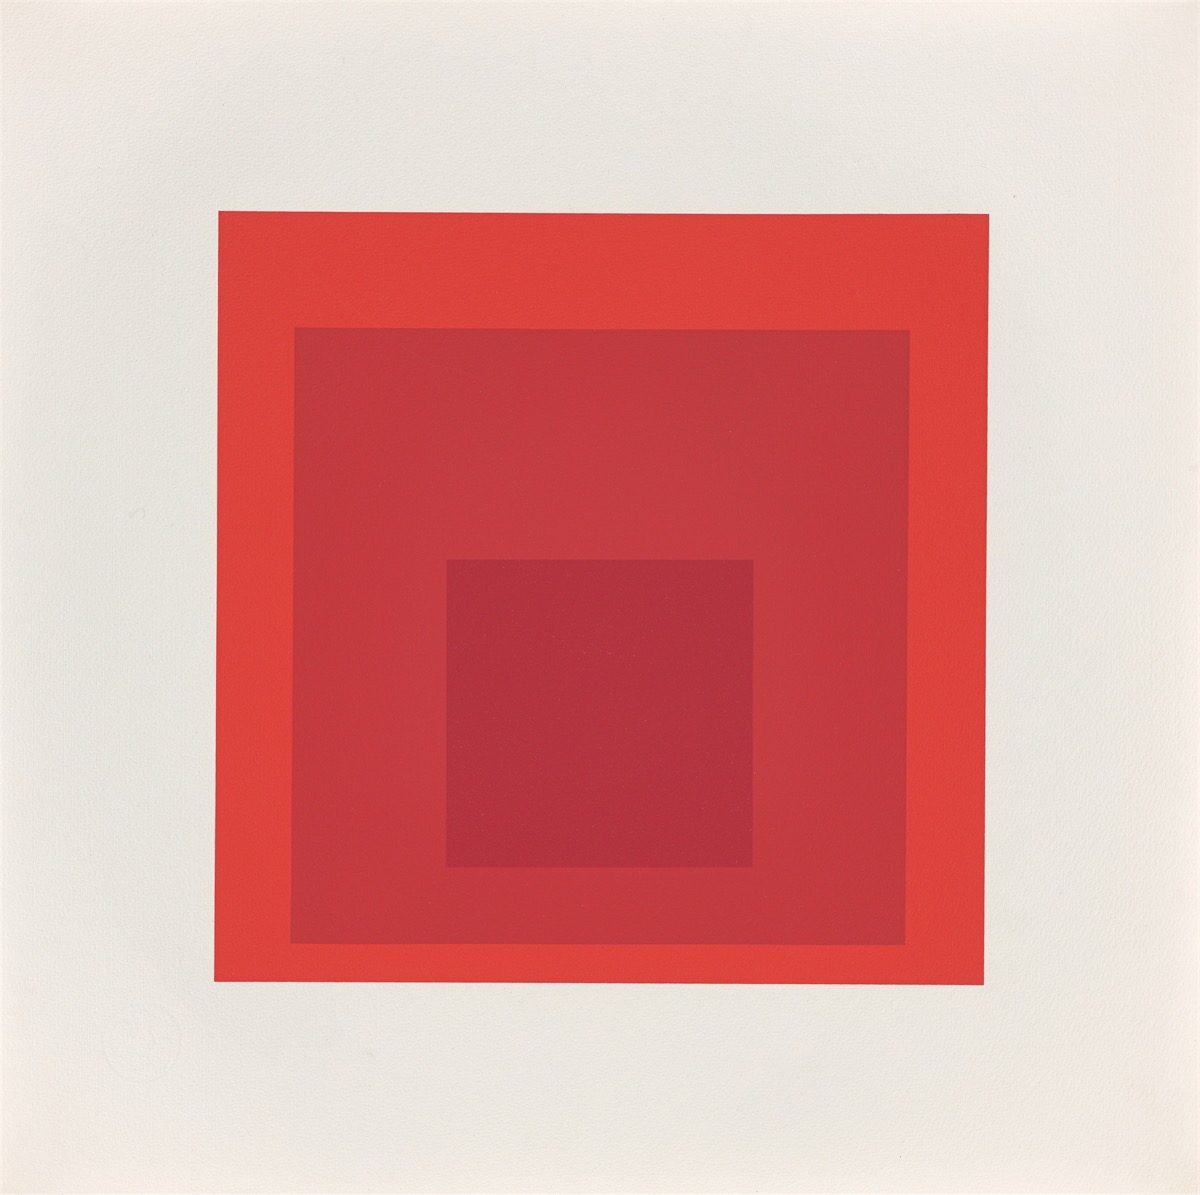 Josef Albers. ”Homage to the Square: Edition Keller I”. 1970 - Image 8 of 8